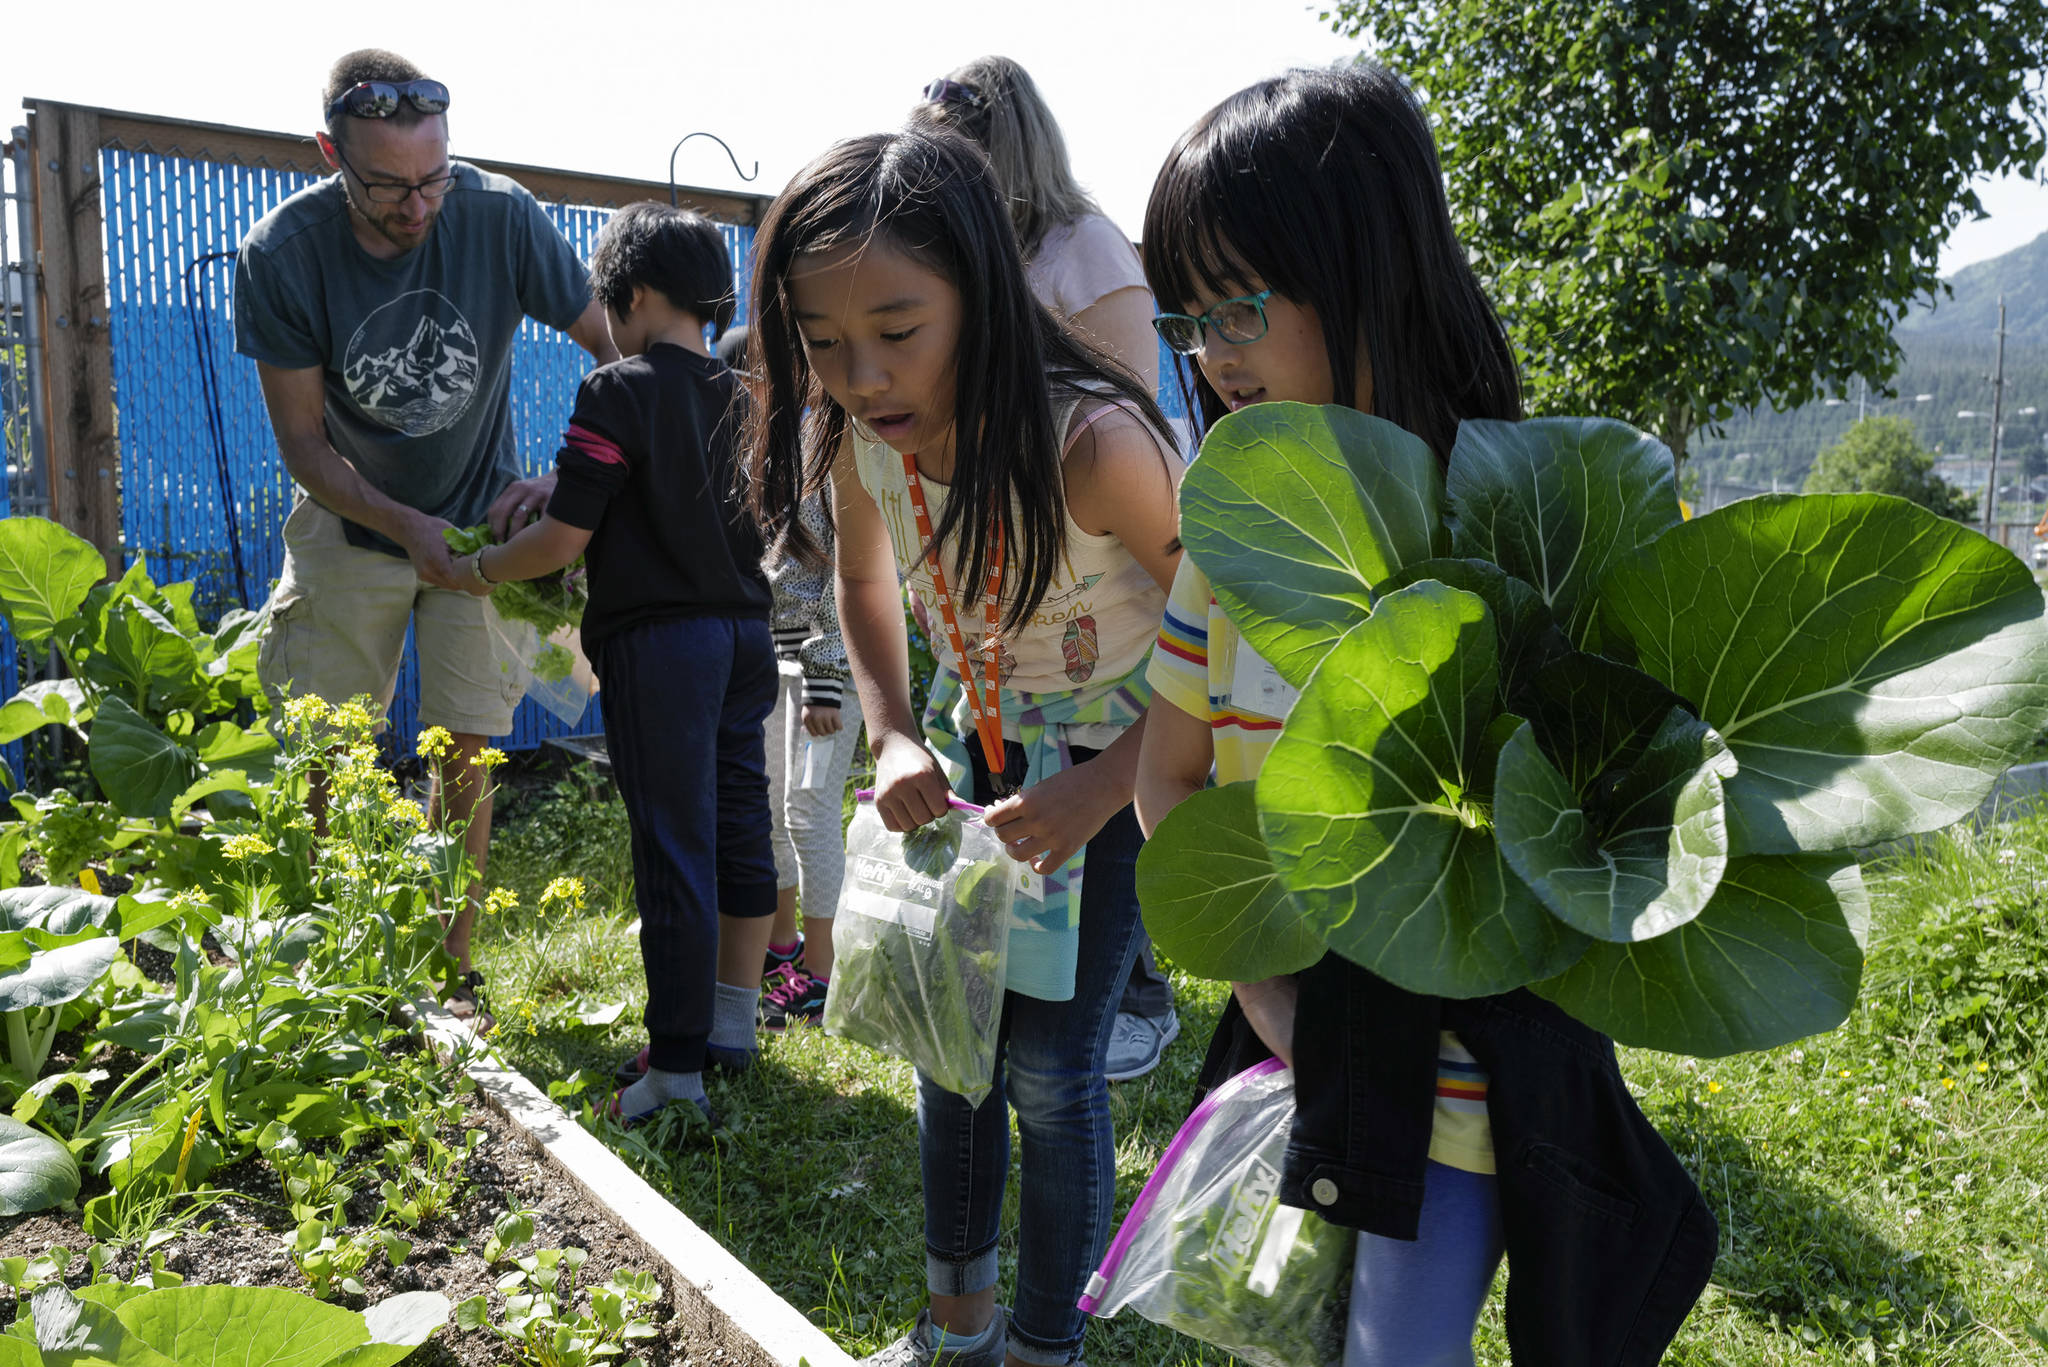 Elyzsa Sapinoso, left, and Emery Marte look at the garden as Master gardener Joel Bos helps student harvest plants at Harborview Elementary School on Wednesday, June 26, 2019. (Michael Penn | Juneau Empire)